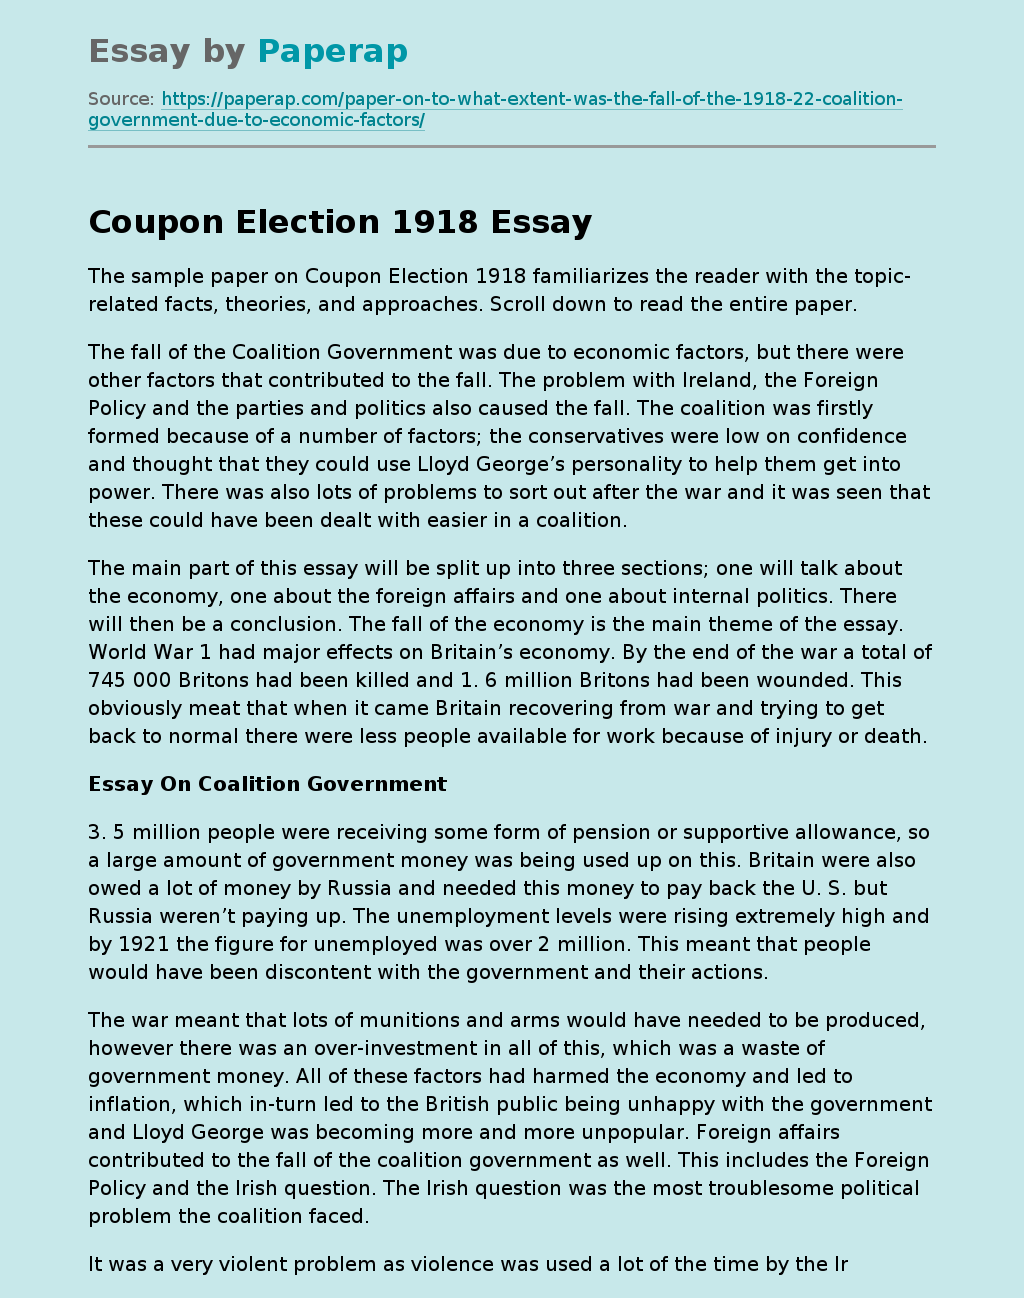 Article on Coupon Elections of 1918